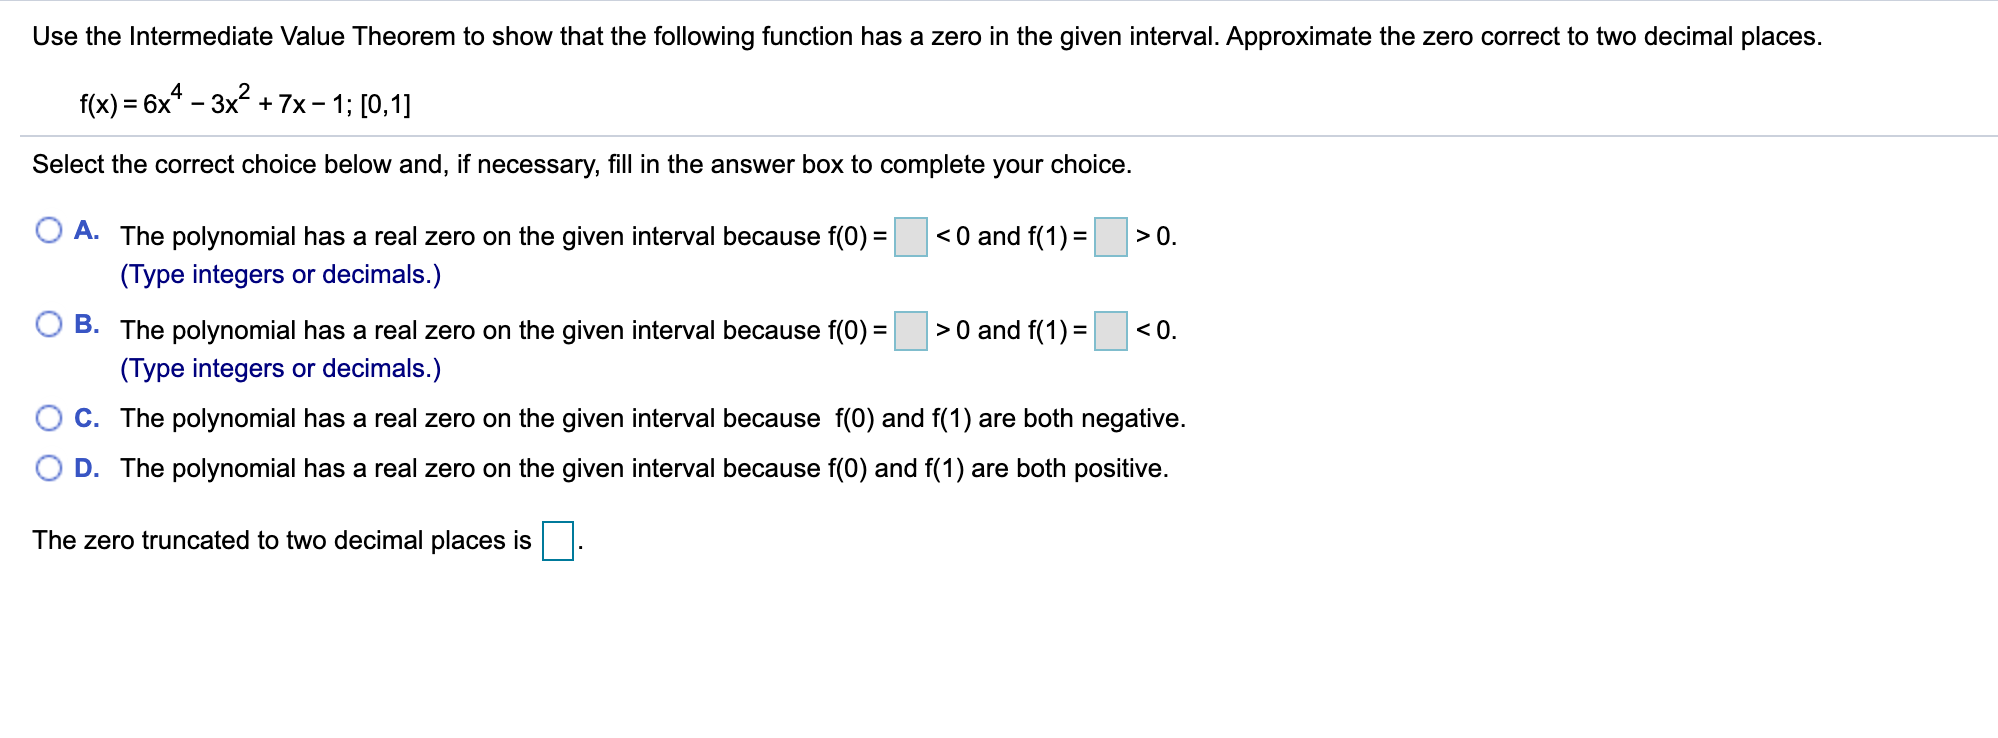 Use the Intermediate Value Theorem to show that the following function has a zero in the given interval. Approximate the zero correct to two decimal places.
f(x) = 6x* - 3x + 7x- 1; [0,1]
Select the correct choice below and, if necessary, fill in the answer box to complete your choice.
< 0 and f(1) =
A. The polynomial has a real zero on the given interval because f(0) =
(Type integers or decimals.)
> 0.
B.
>0 and f(1) =
The polynomial has a real zero on the given interval because f(0) =
(Type integers or decimals.)
C. The polynomial has a real zero on the given interval because f(0) and f(1) are both negative.
D. The polynomial has a real zero on the given interval because f(0) and f(1) are both positive.
< 0.
The zero truncated to two decimal places is
